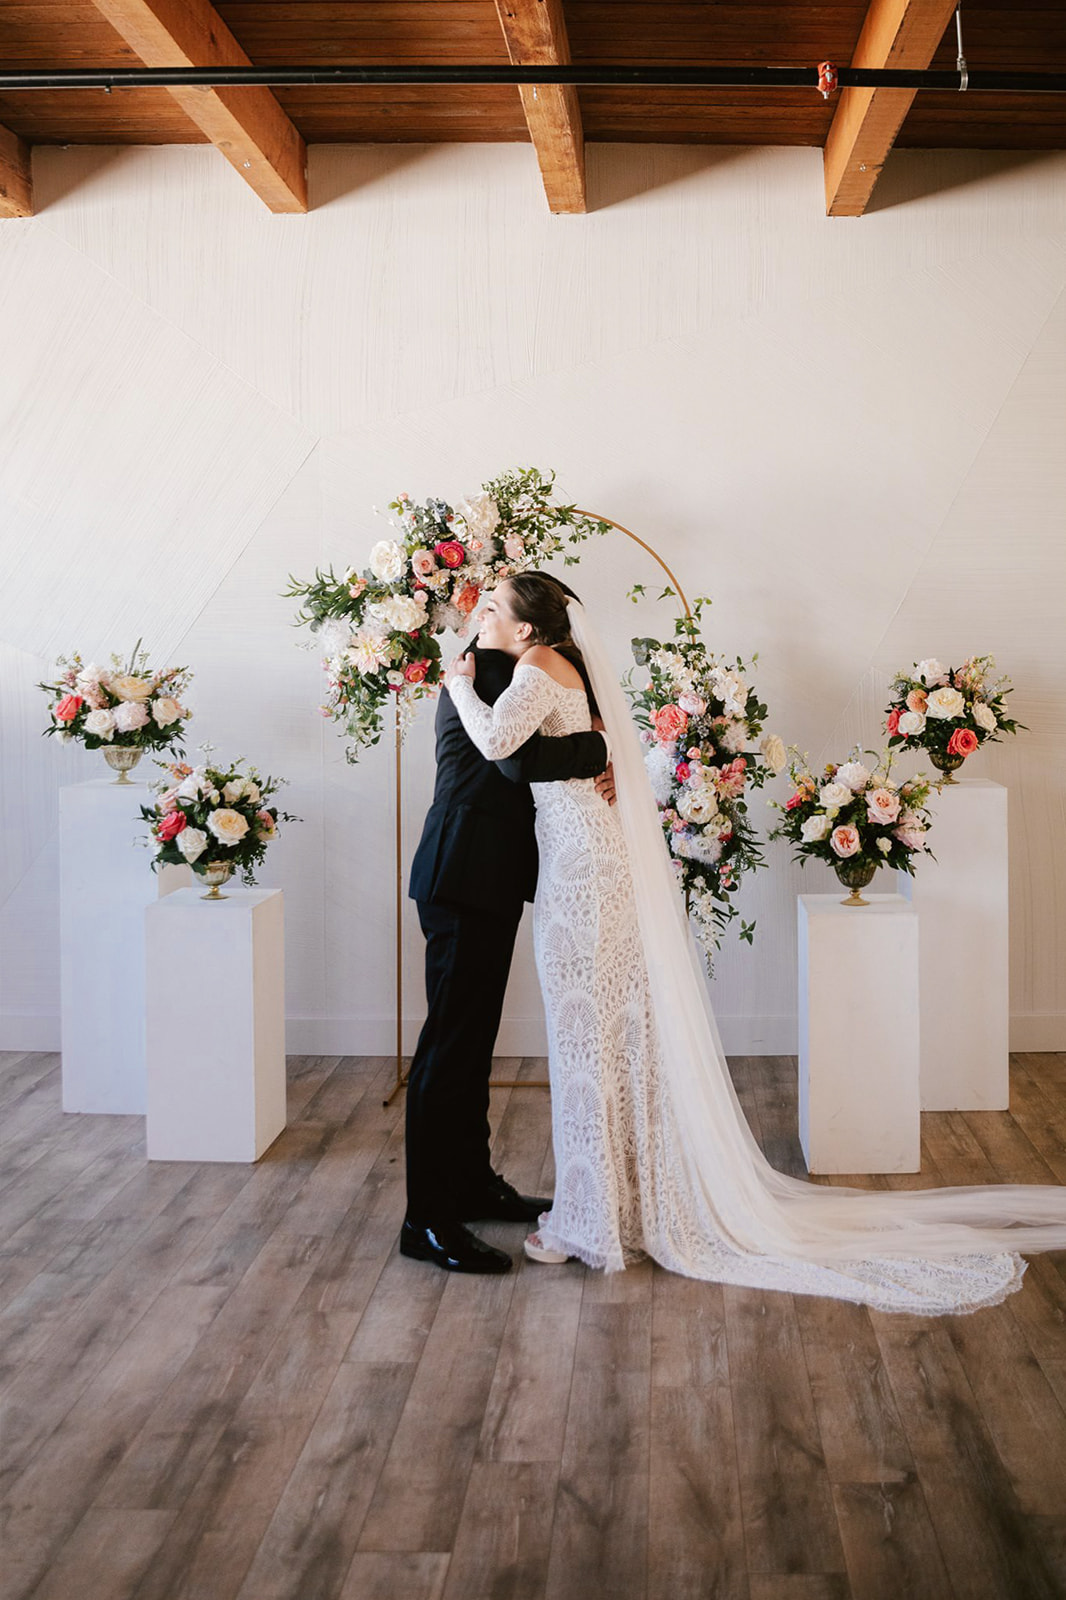 At Walden Chicago, the bride and groom share a breathtaking first look amidst vibrant peach, coral, and white blooms.